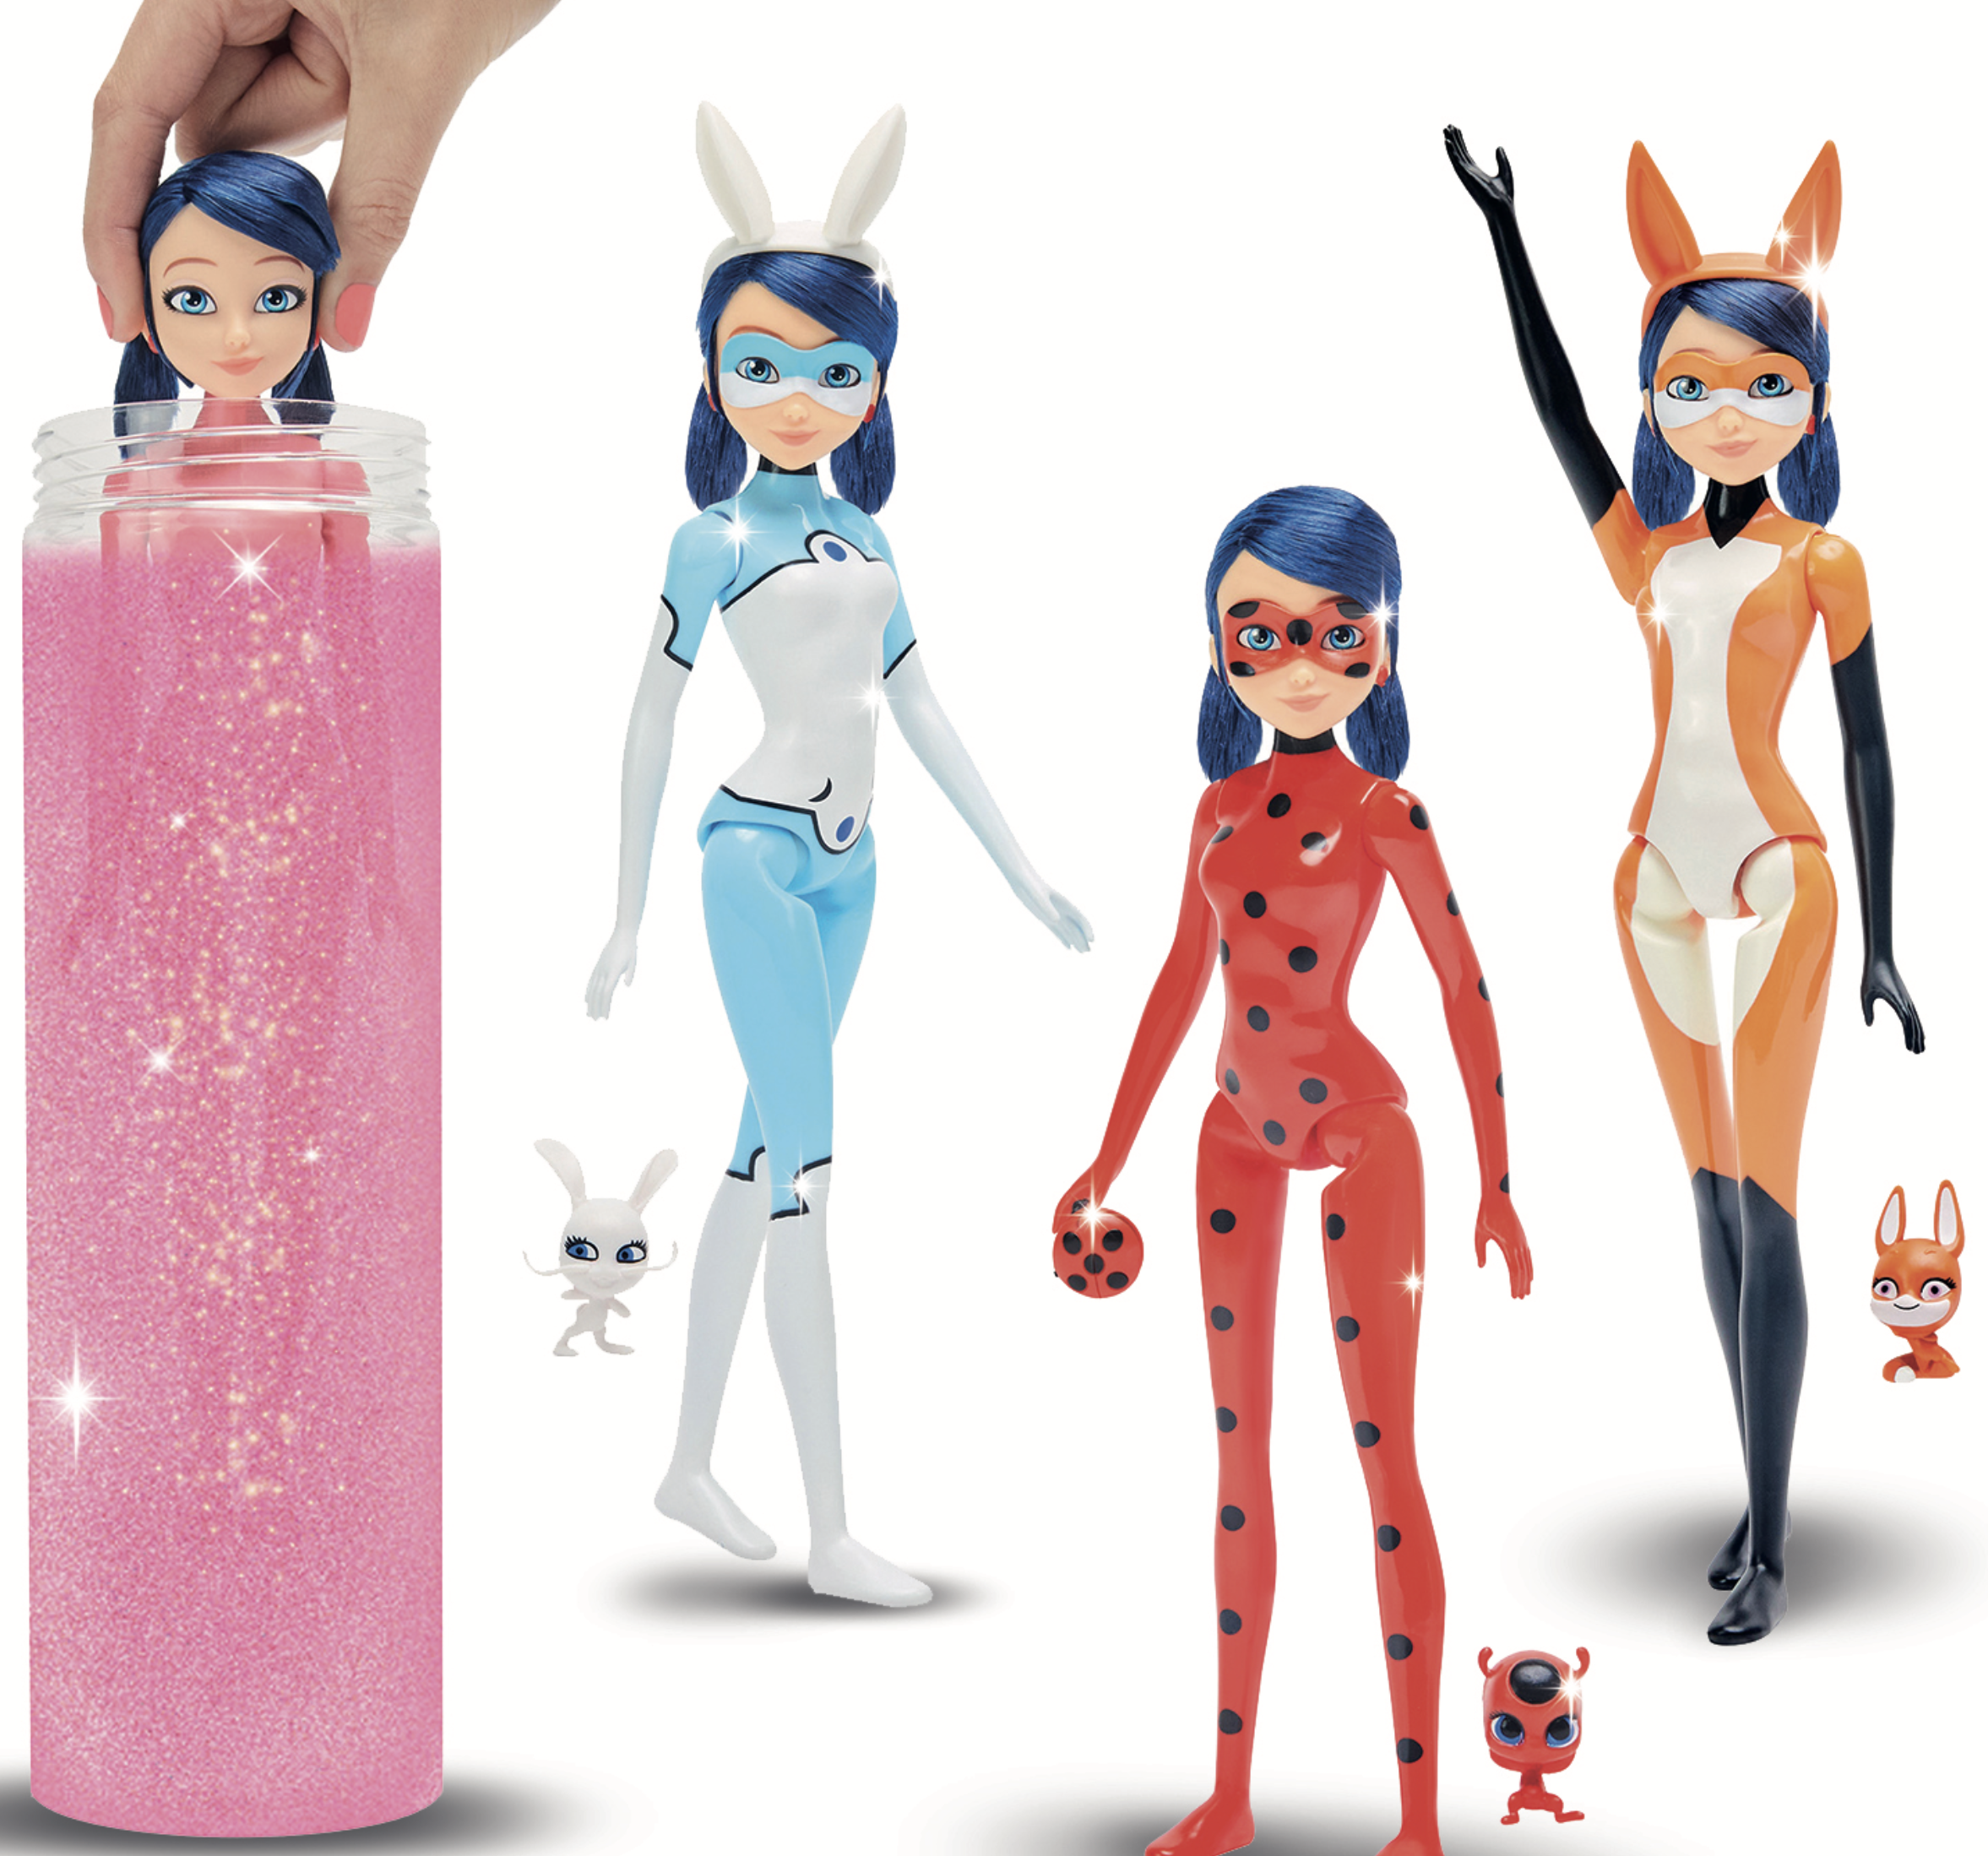 ZAG 'Miraculous' Dolls to be Displayed at 'The Play Date' in NYC